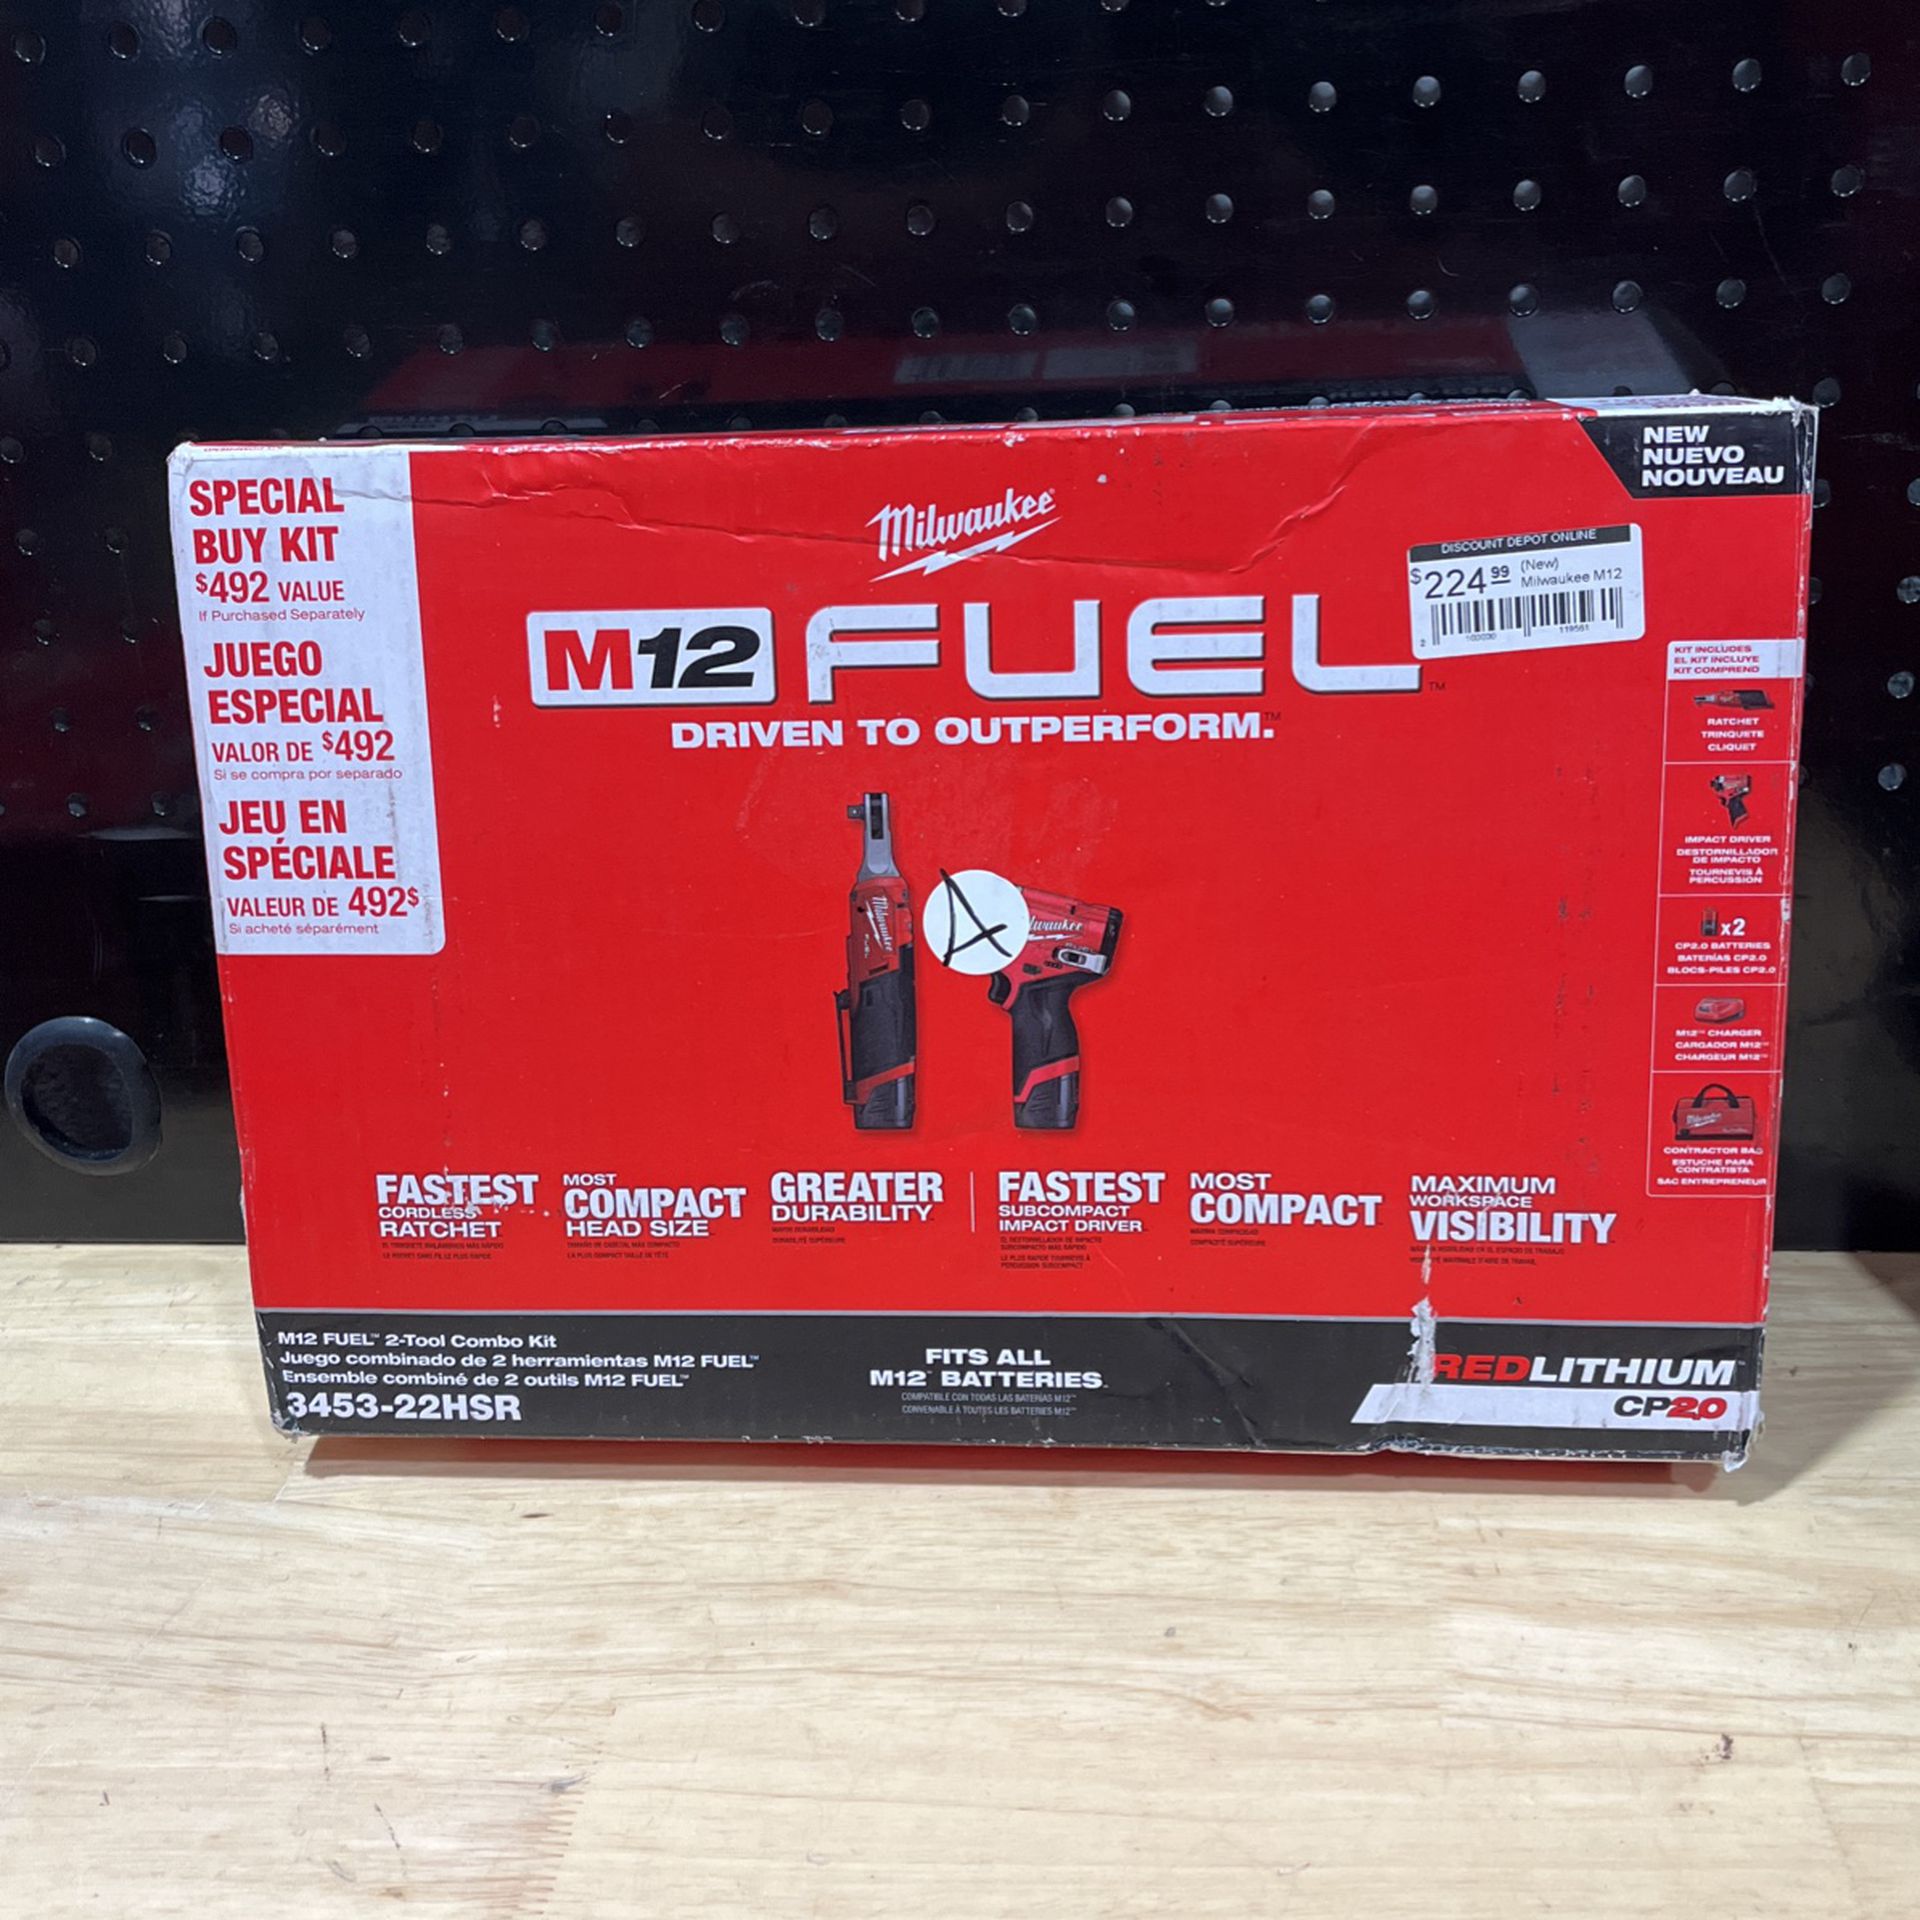 M12 FUEL 12V Lithium-Ion Cordless 3/8 in. Ratchet and 1/4 in. Impact Driver  Kit (2-Tool) w/Batteries, Charger  Bag for Sale in Phoenix, AZ OfferUp